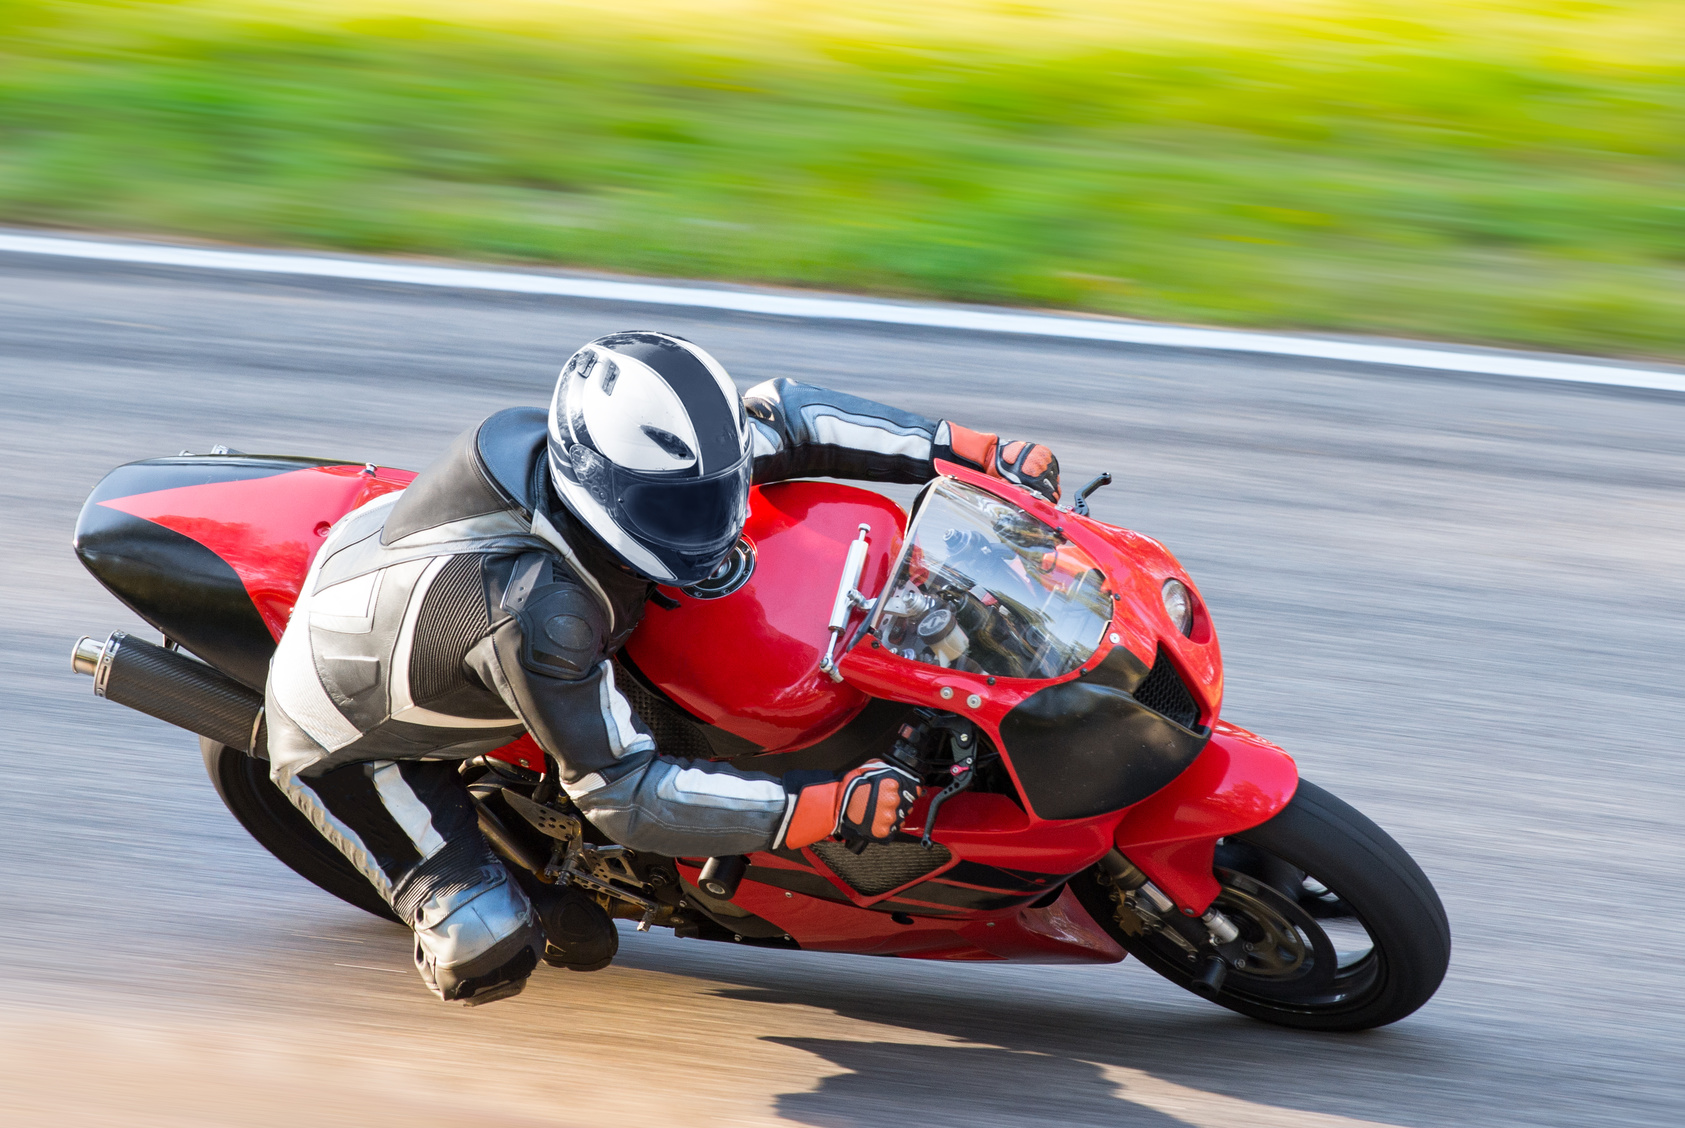 All about motorcycle insurance